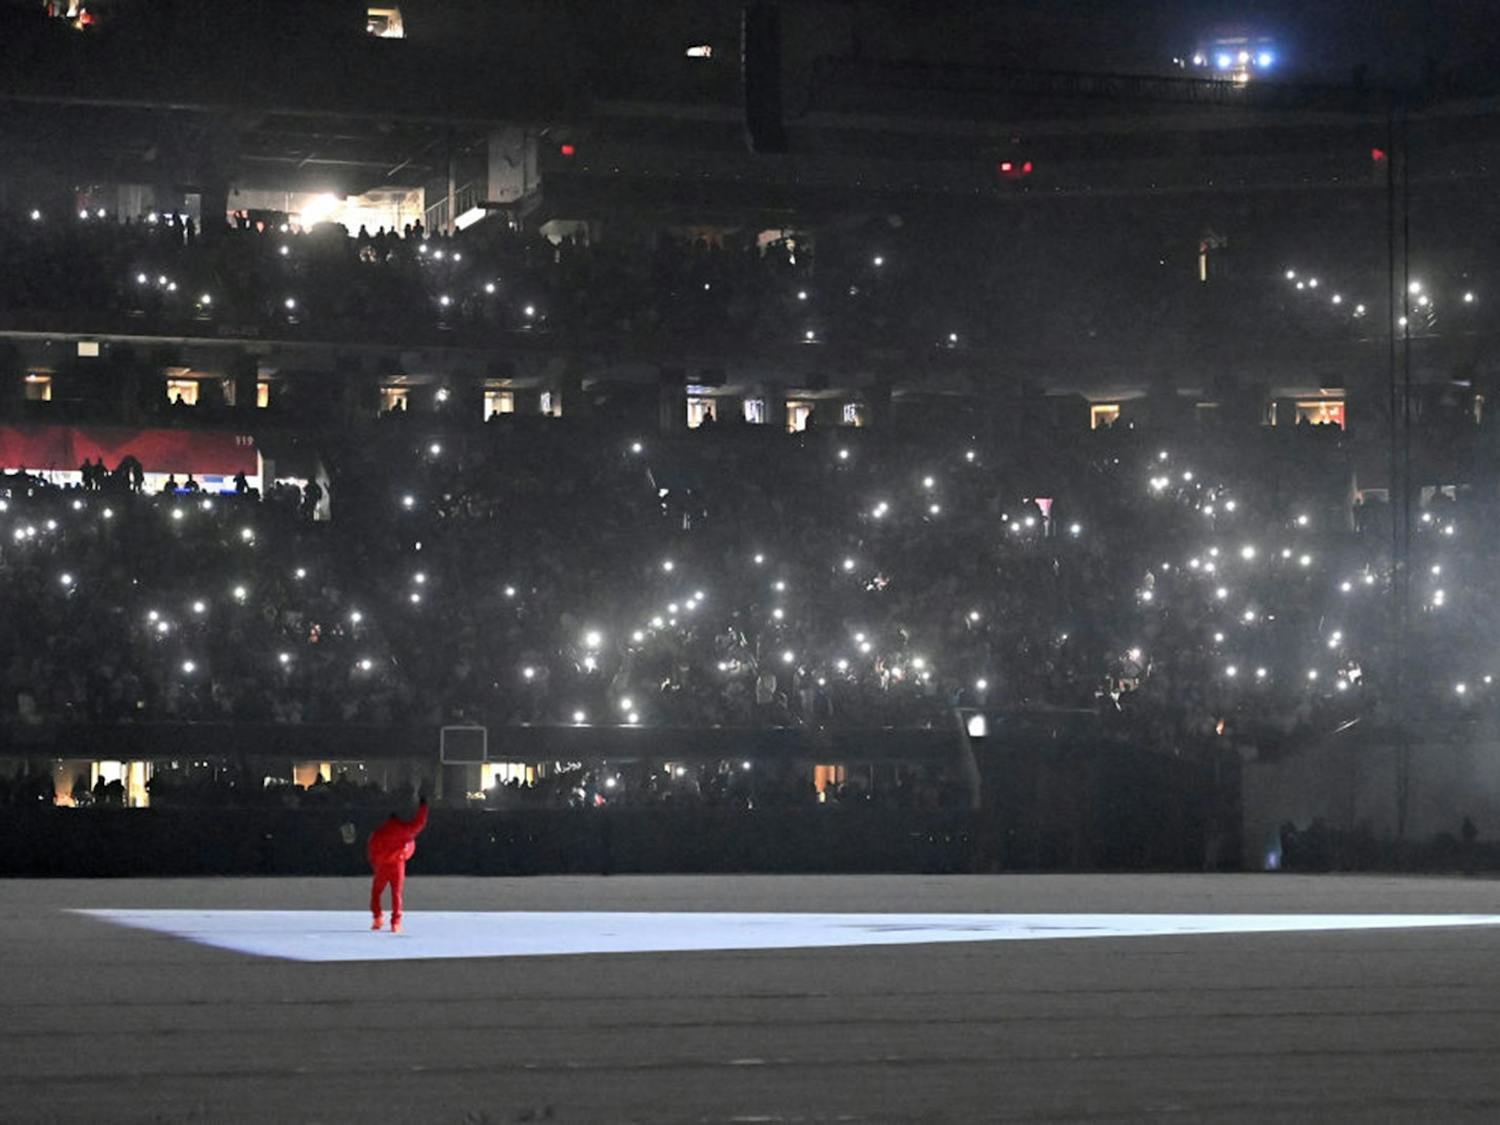 Kanye West is seen at "DONDA by Kanye West" listening event at Mercedes-Benz Stadium on July 22, 2021 in Atlanta, Georgia. Photo Courtesy of Paras Griffin/Getty Images for Universal Music Group.